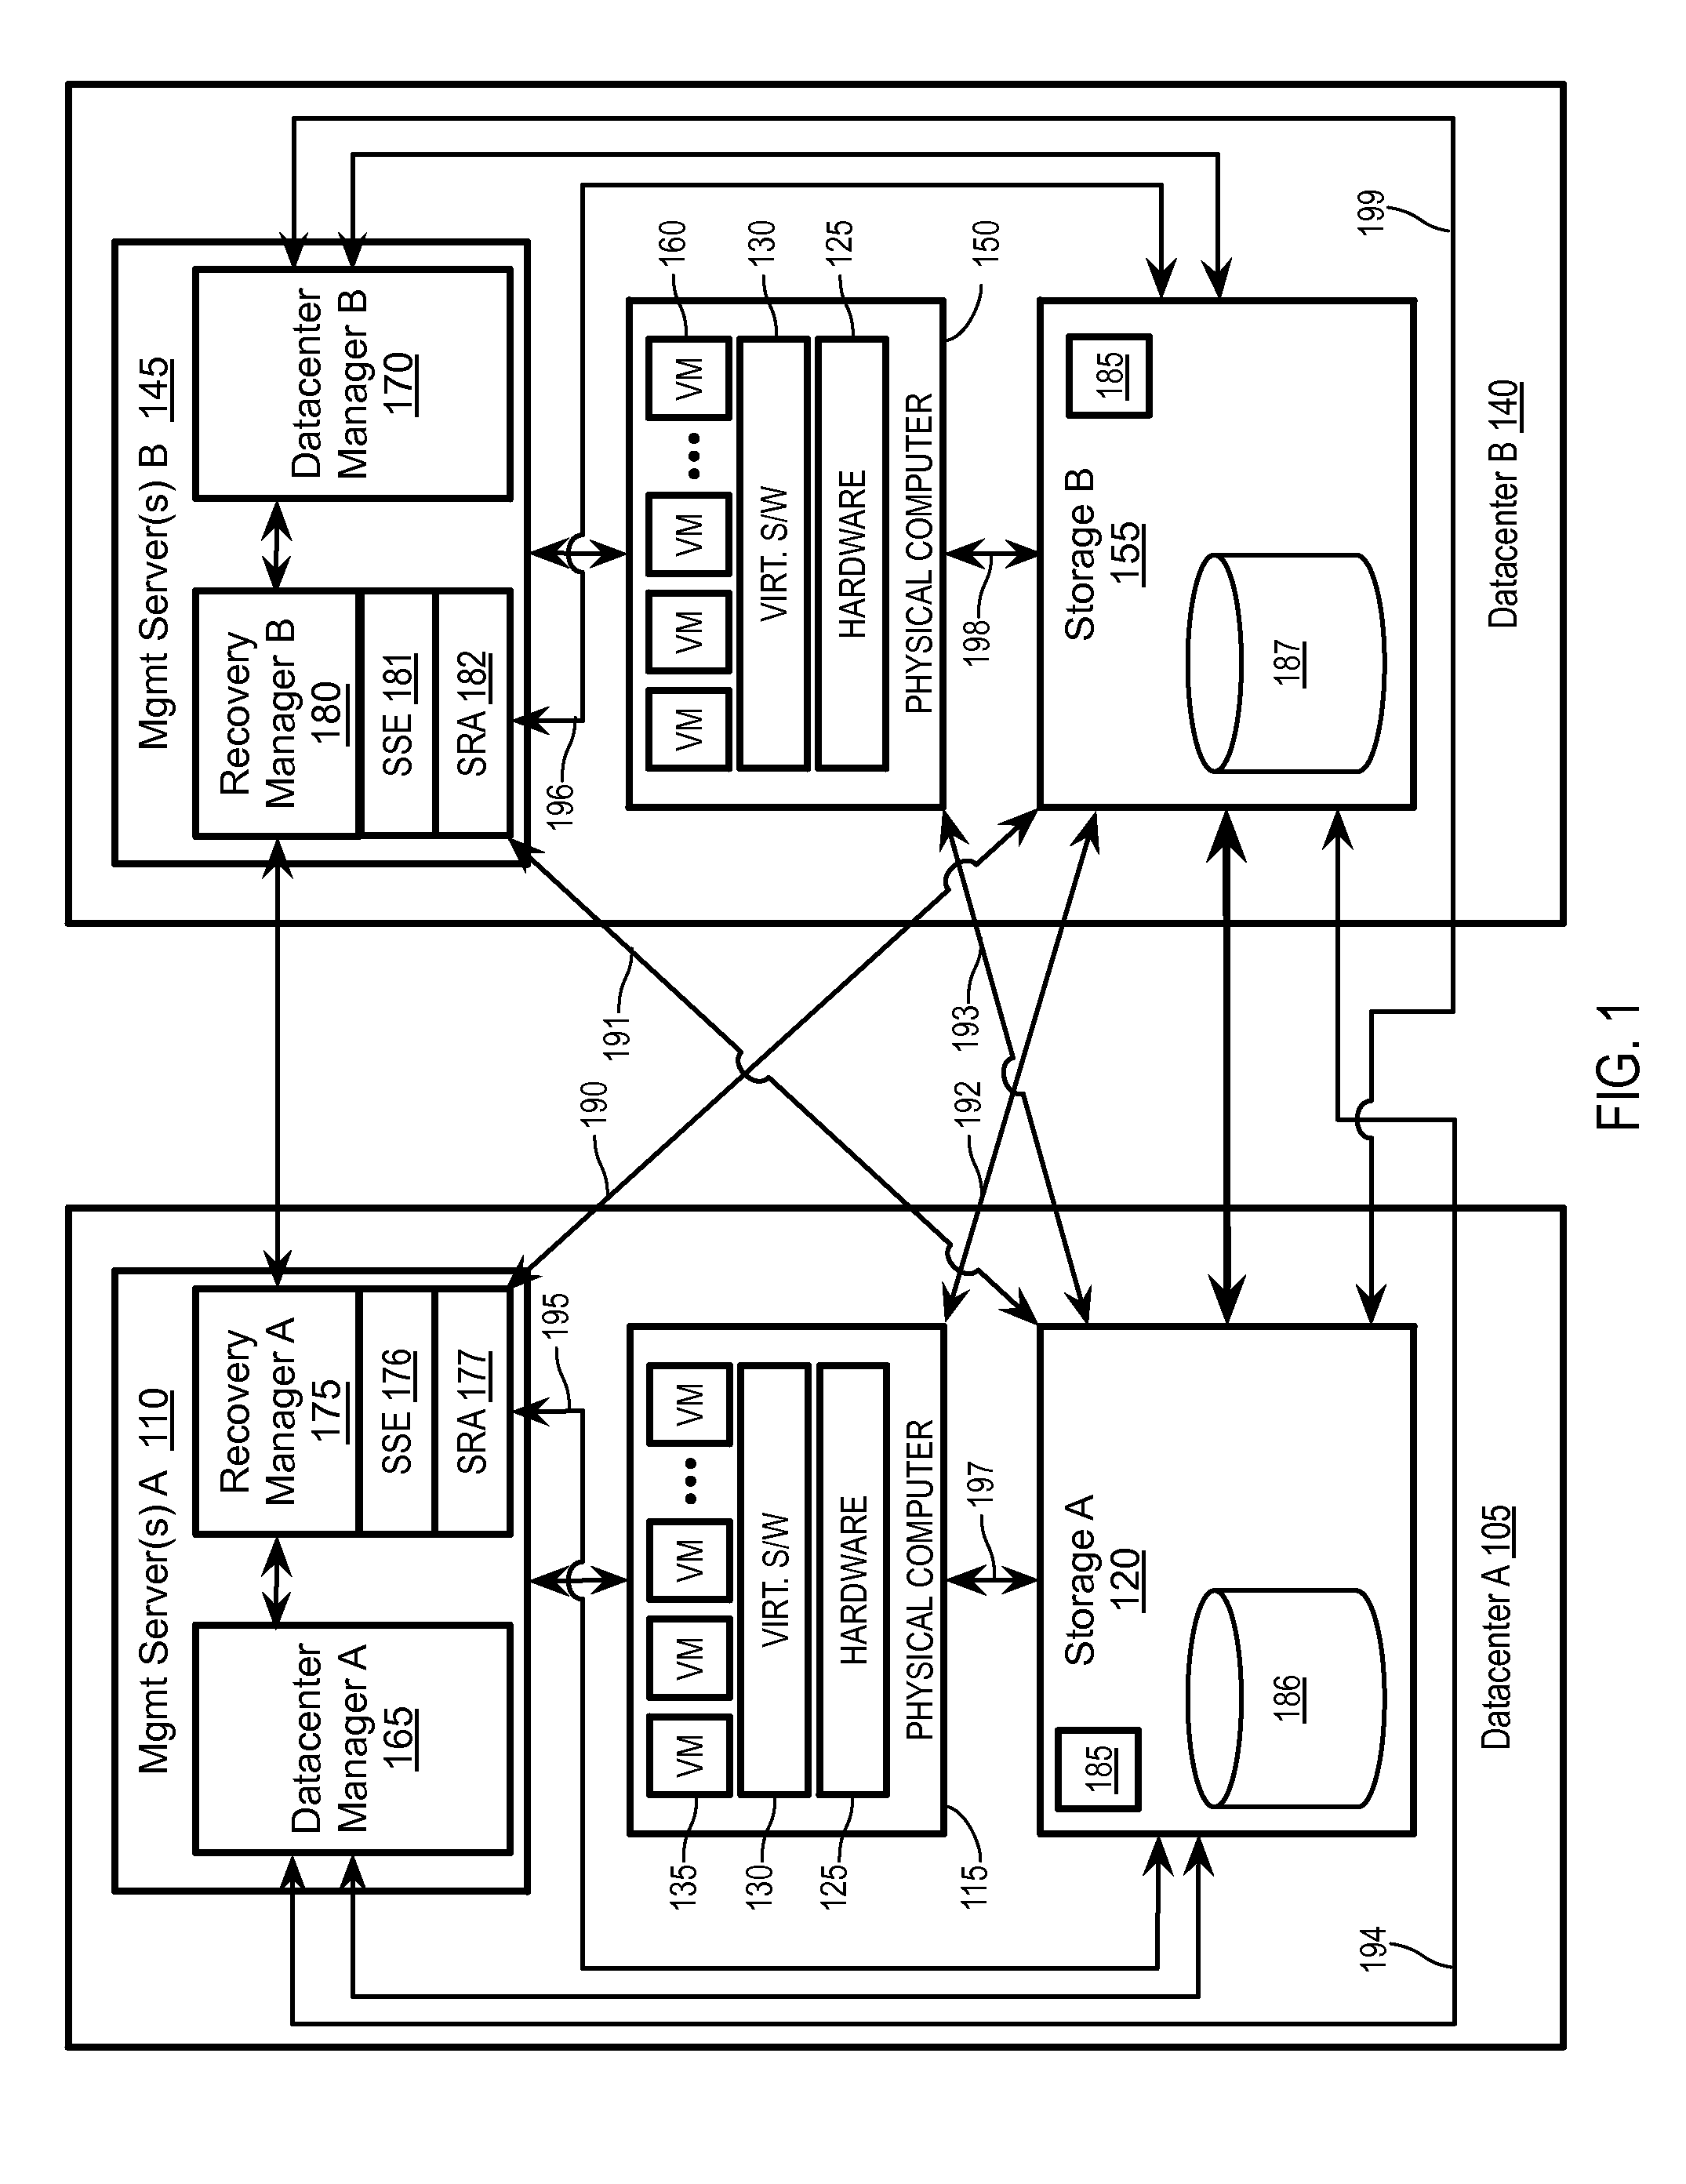 Emulating a stretched storage device using a shared storage device